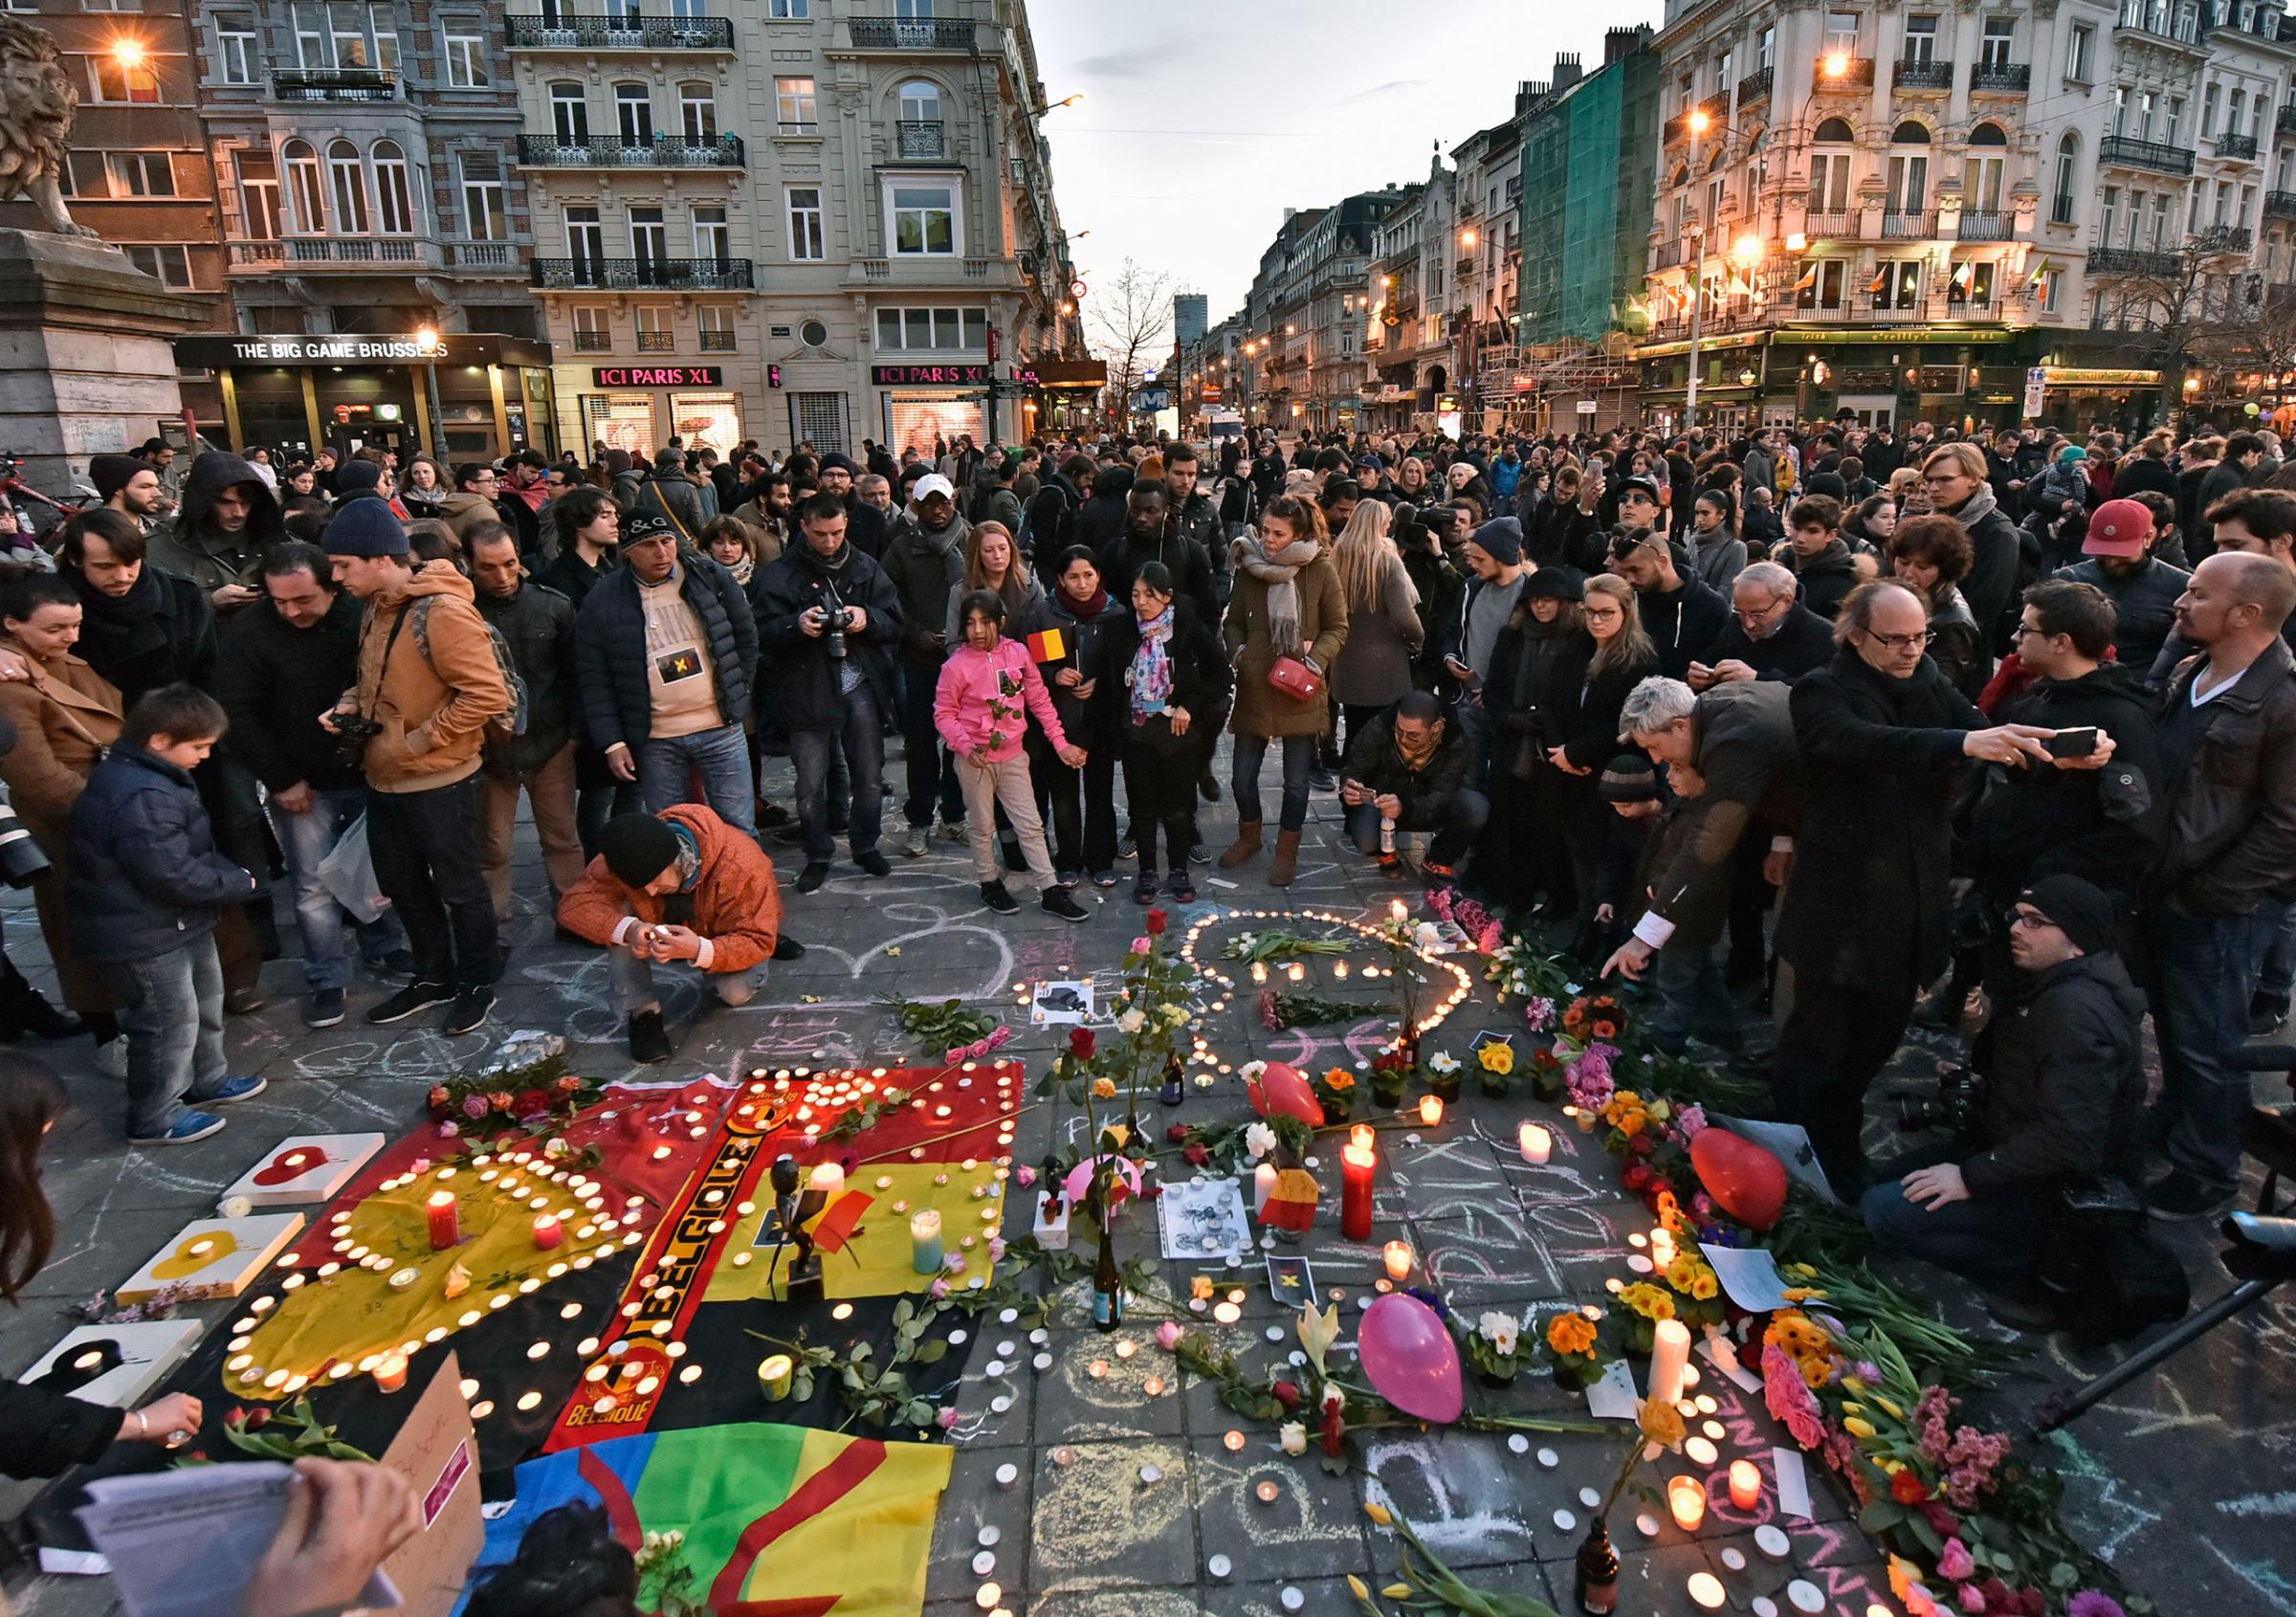 People bring flowers and candles to mourn at the Place de la Bourse in the center of Brussels, Belgium, March 22, 2016.